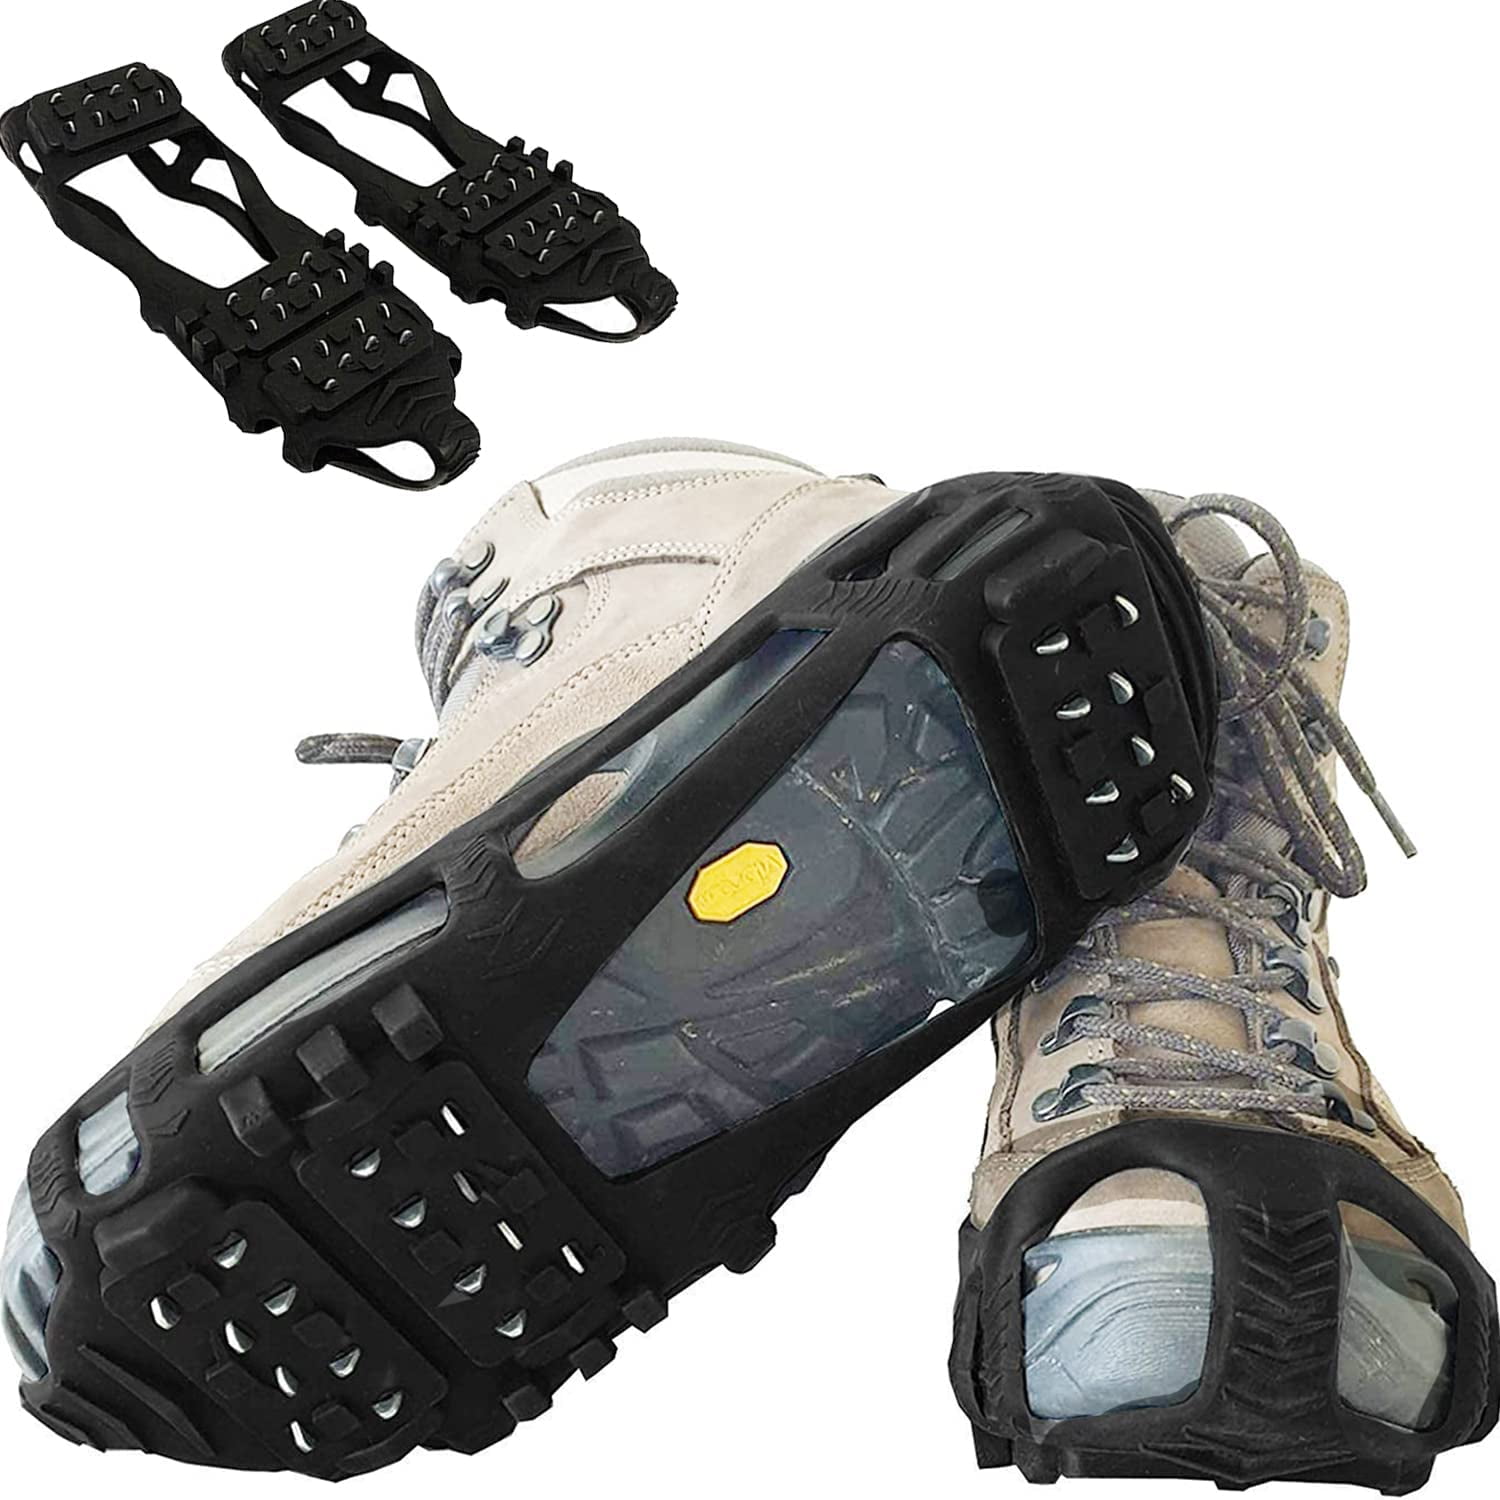 Ice Snow Traction Cleats - Lightweight Crampon Cleats for Walking on ...